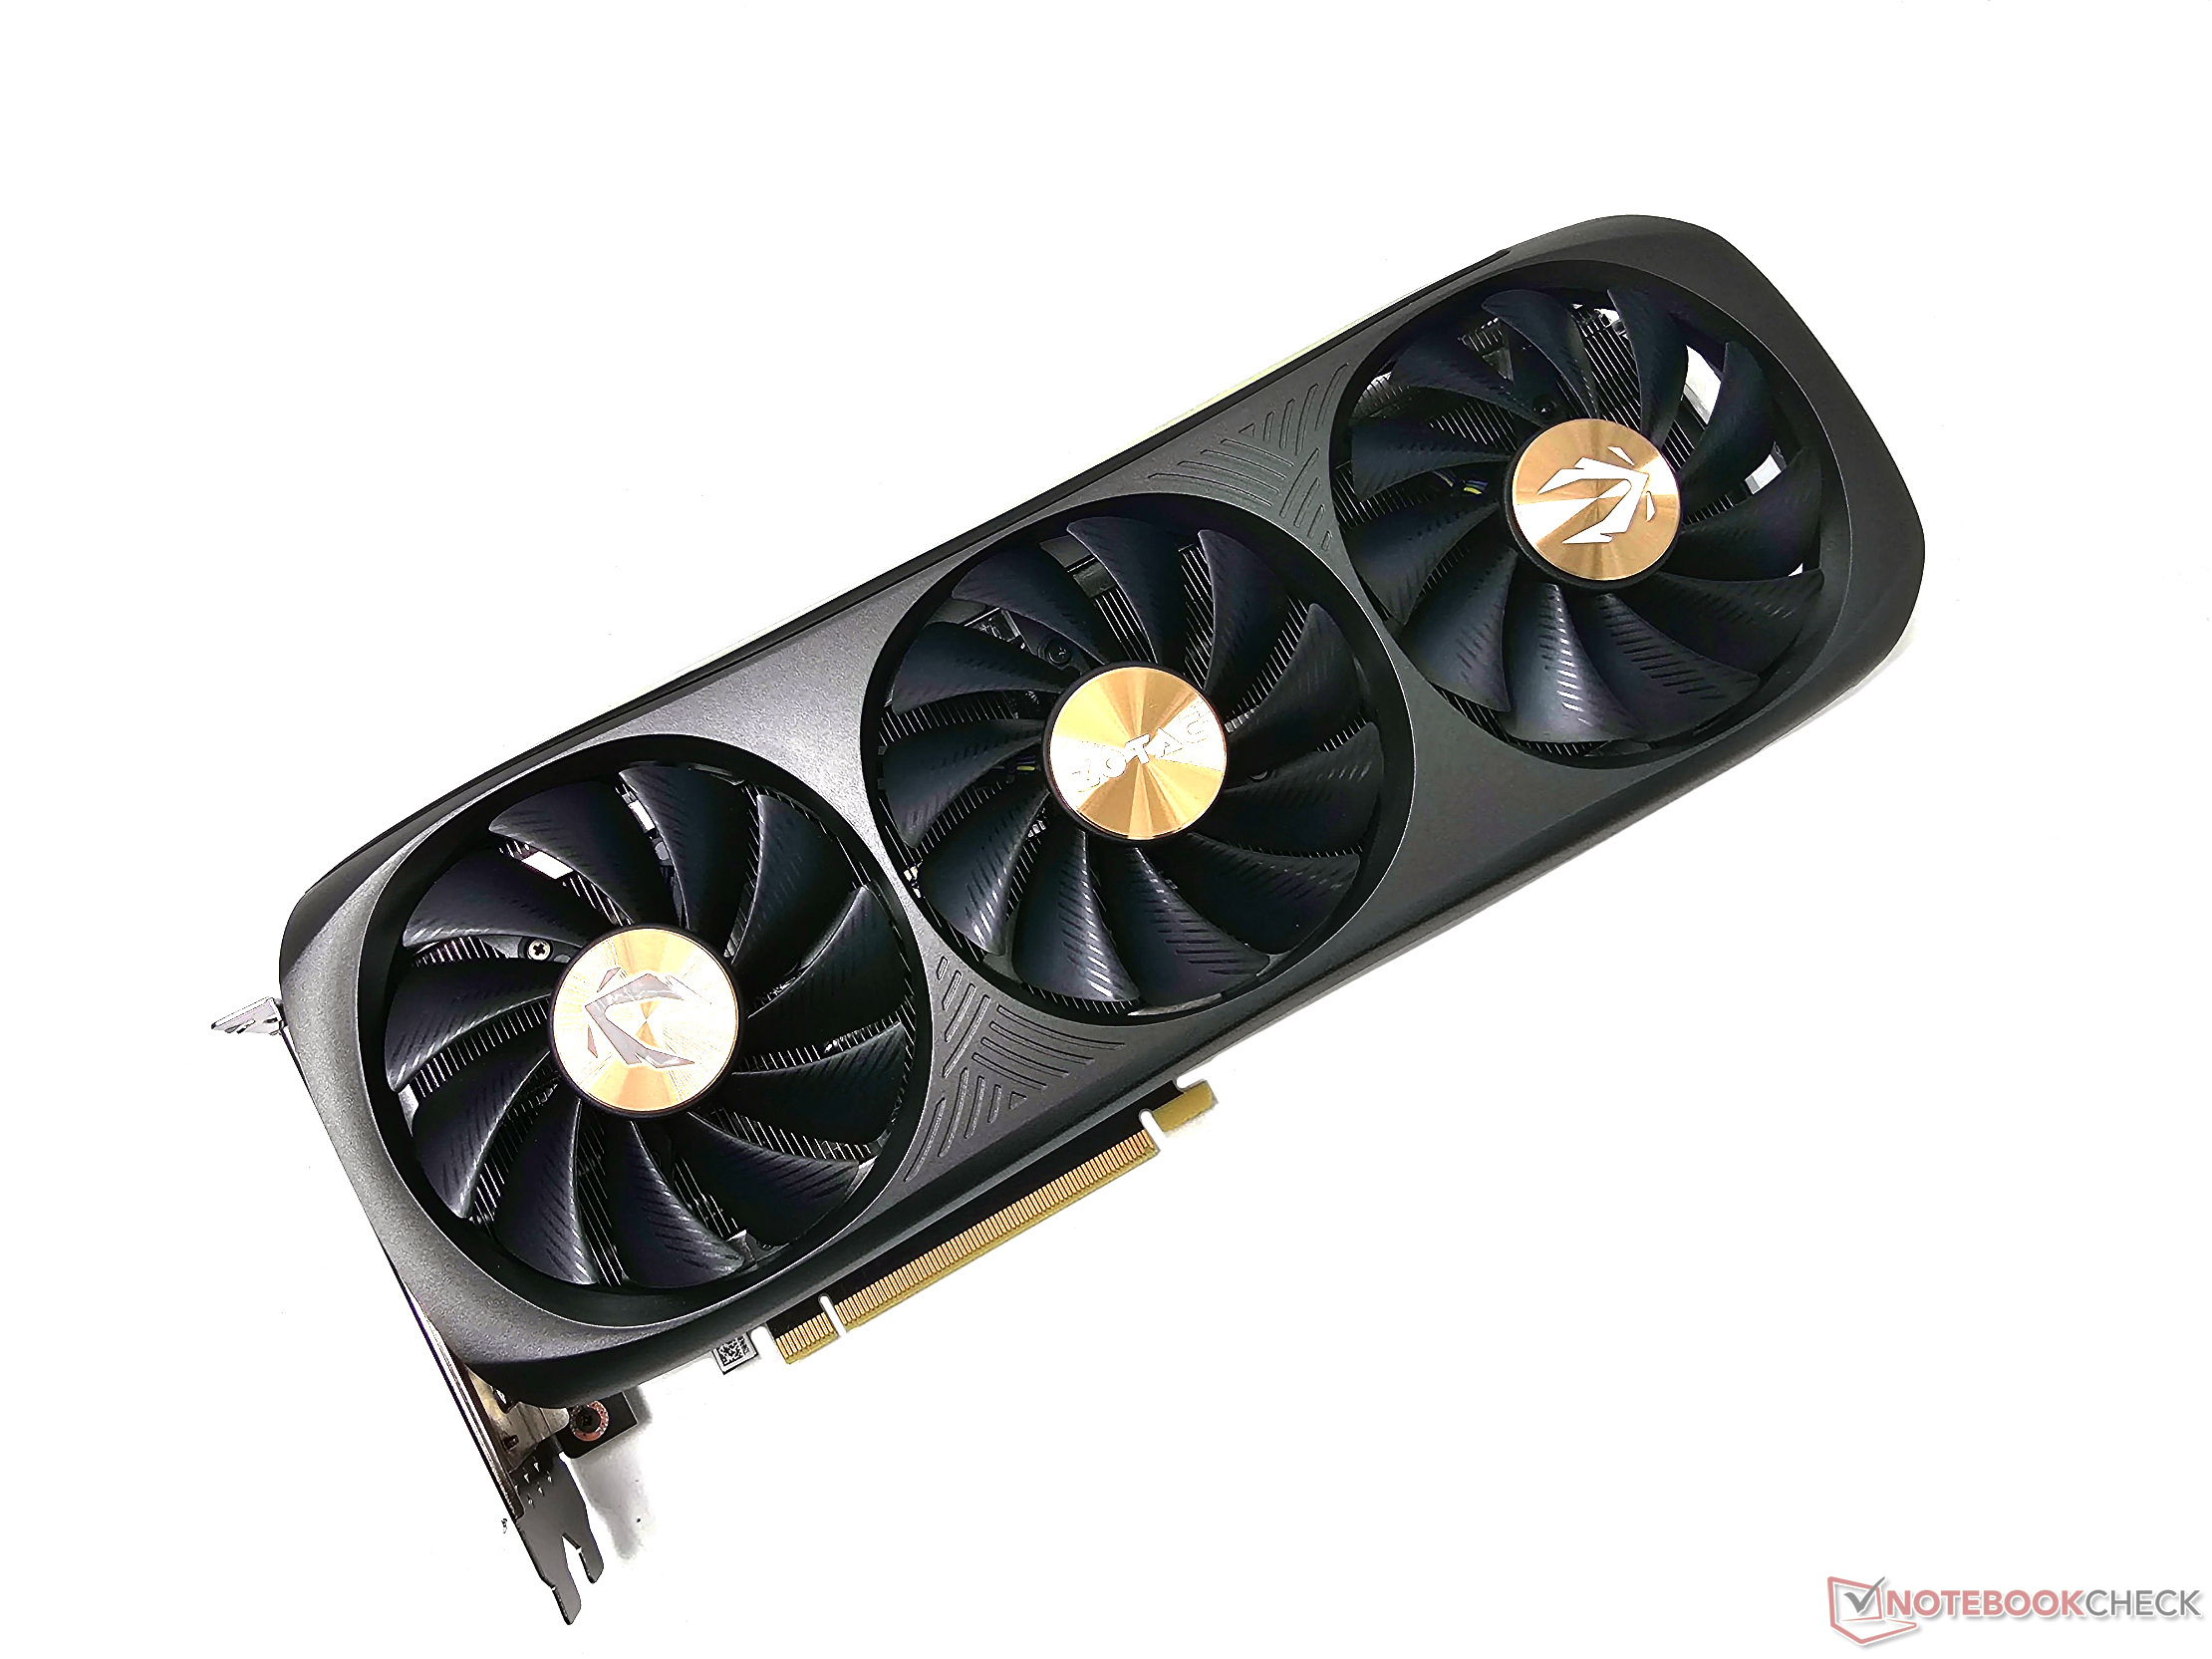 Nvidia GeForce RTX 4060 Ti 16GB may be failing to convince AIBs